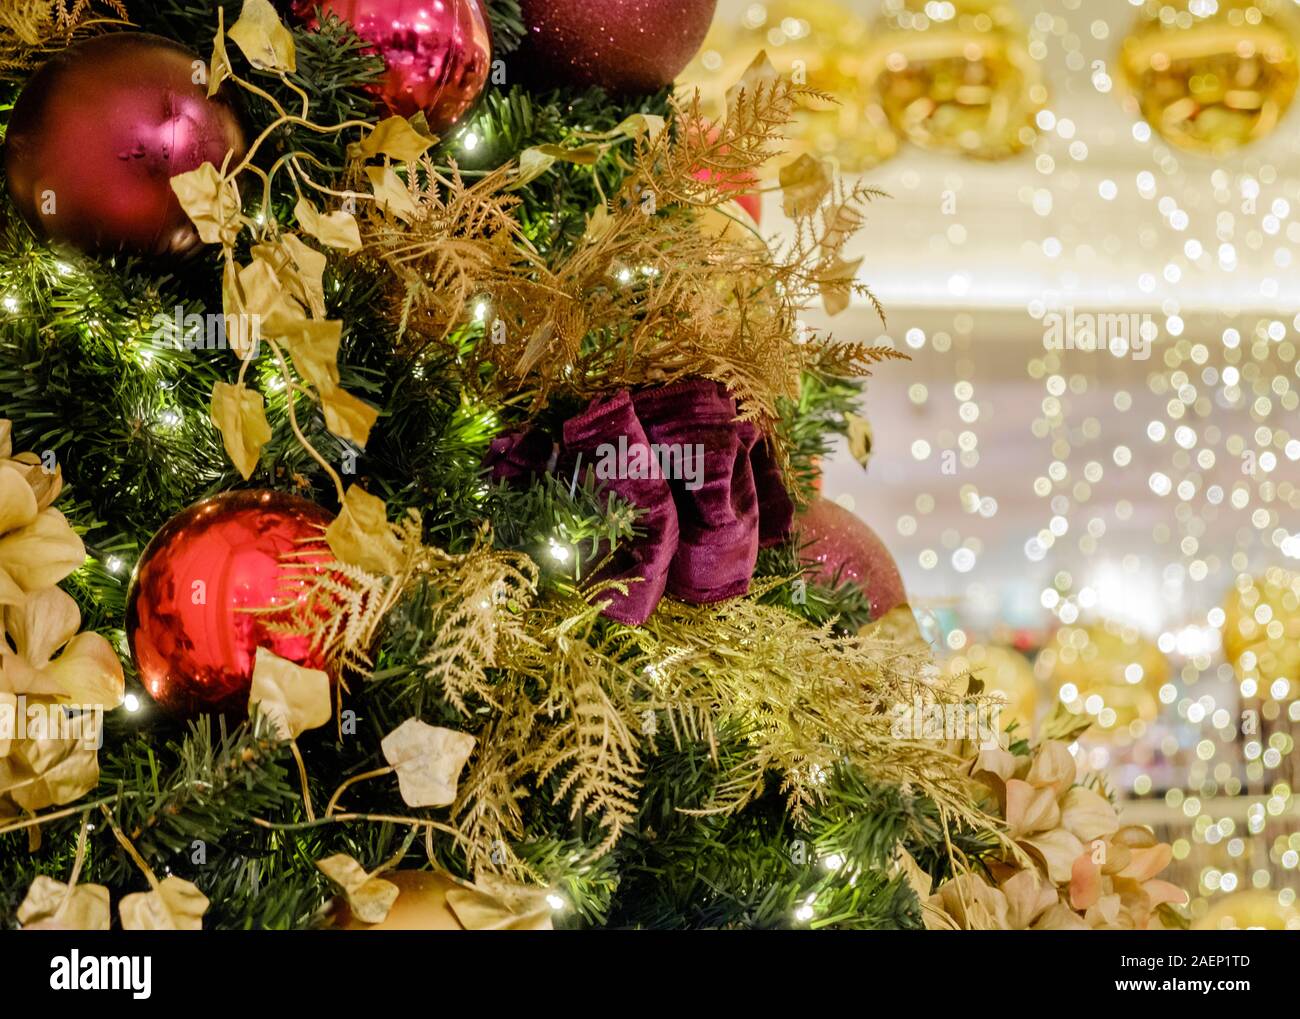 Close Up of Christmas Tree with colourful red purple and gold baubles and decorations and blurred festive background. Stock Photo